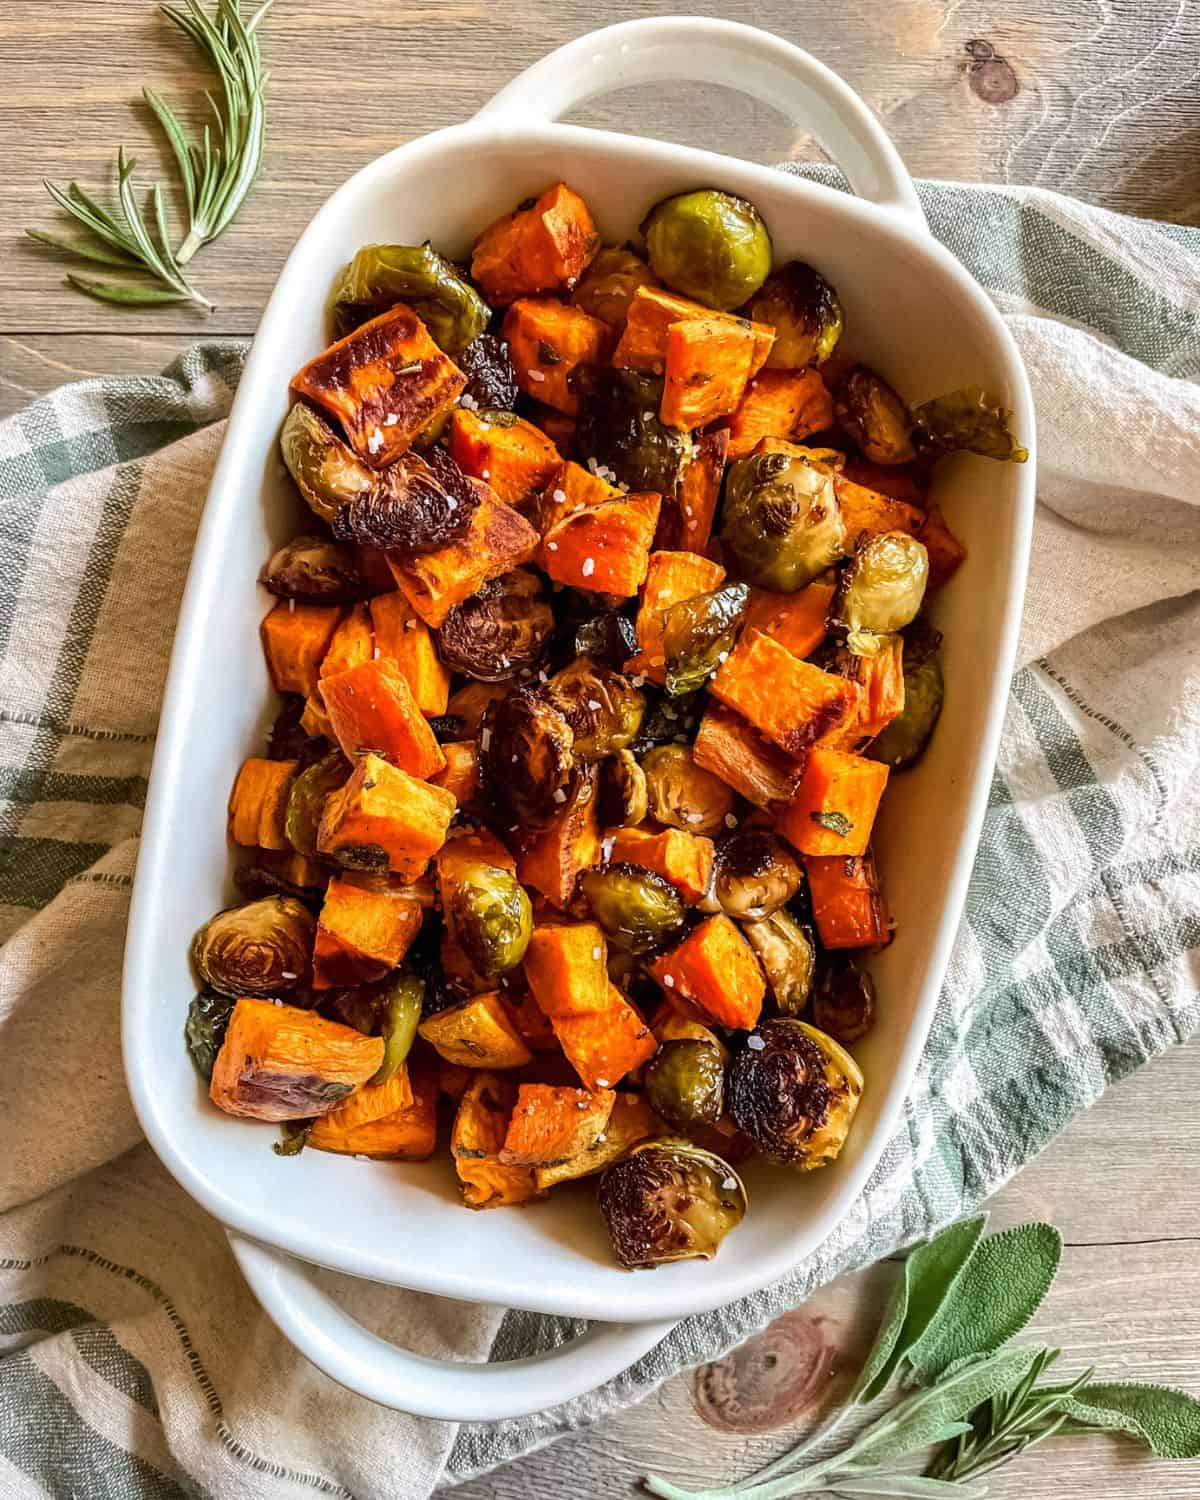 Roasted sweet potatoes and roasted brussel sprouts in glass casserole dish with handles, on a green and white dish towel, with fresh herbs on the sides.